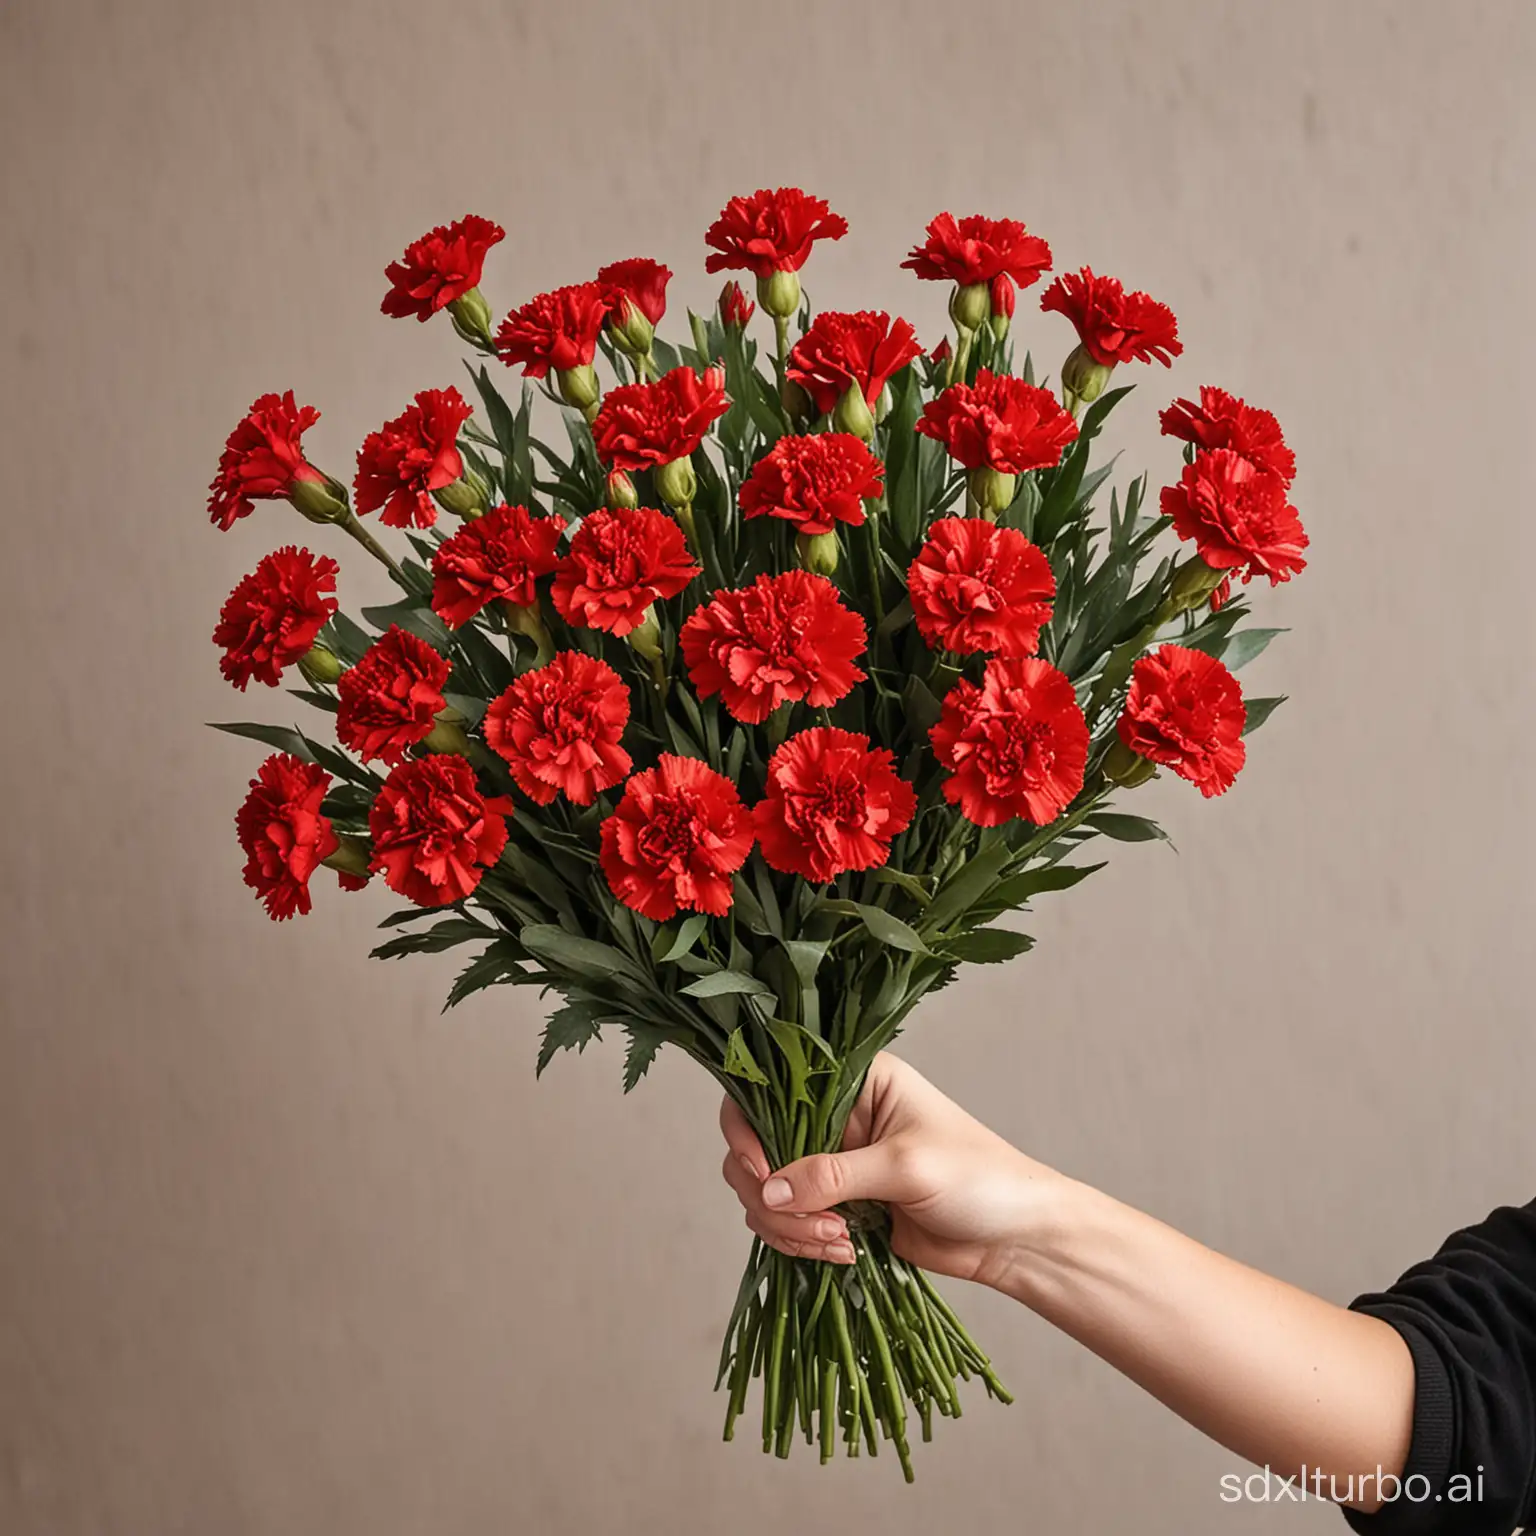 Woman-Holding-Bouquet-of-201-Vibrant-Red-Carnations